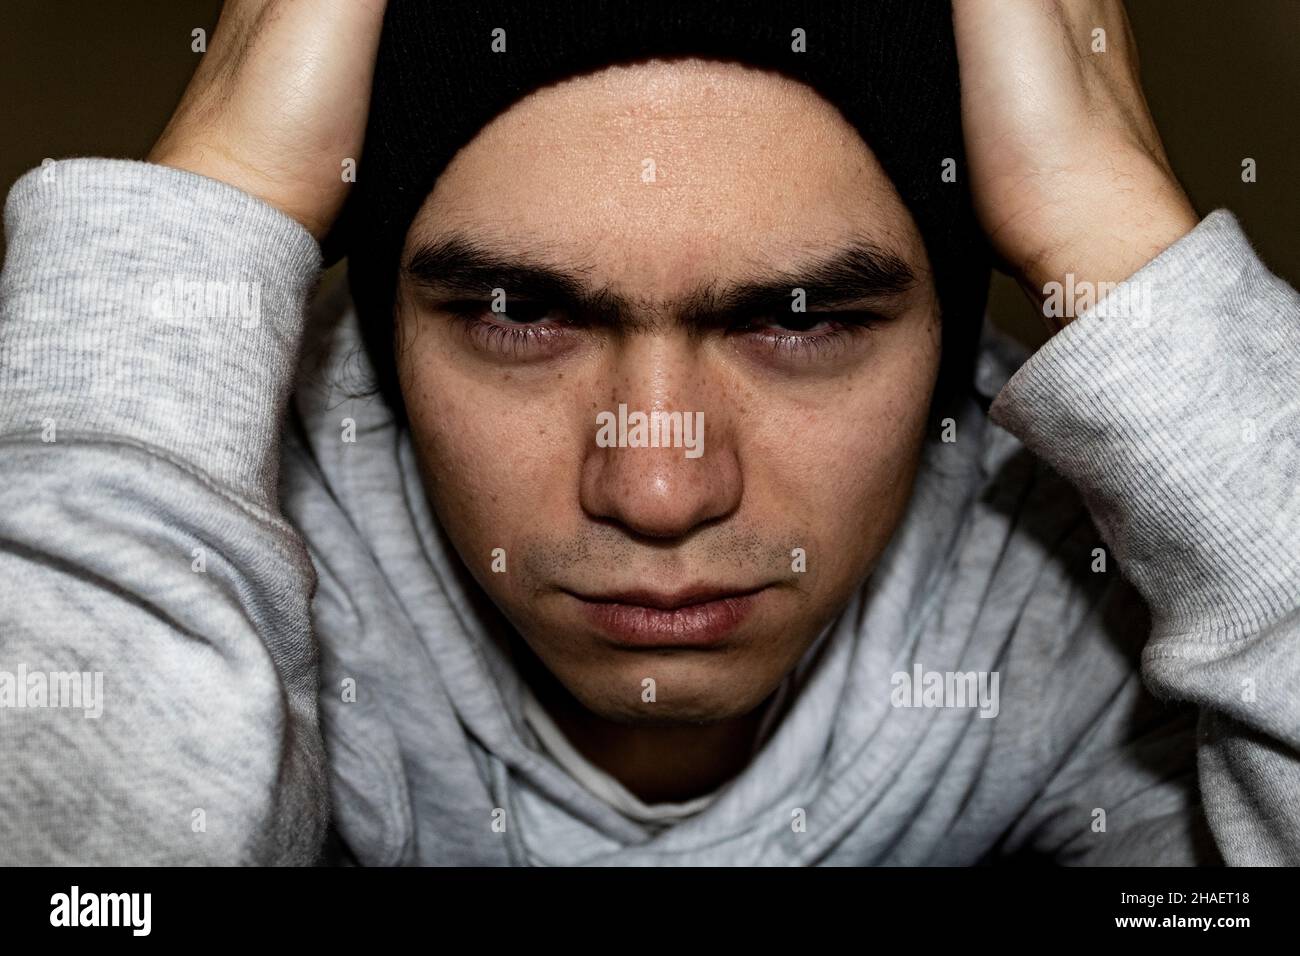 young Filipino man close up of face with hands on head, angry concentrating face. white sweater black hat bushy eyebrows red eyes Stock Photo